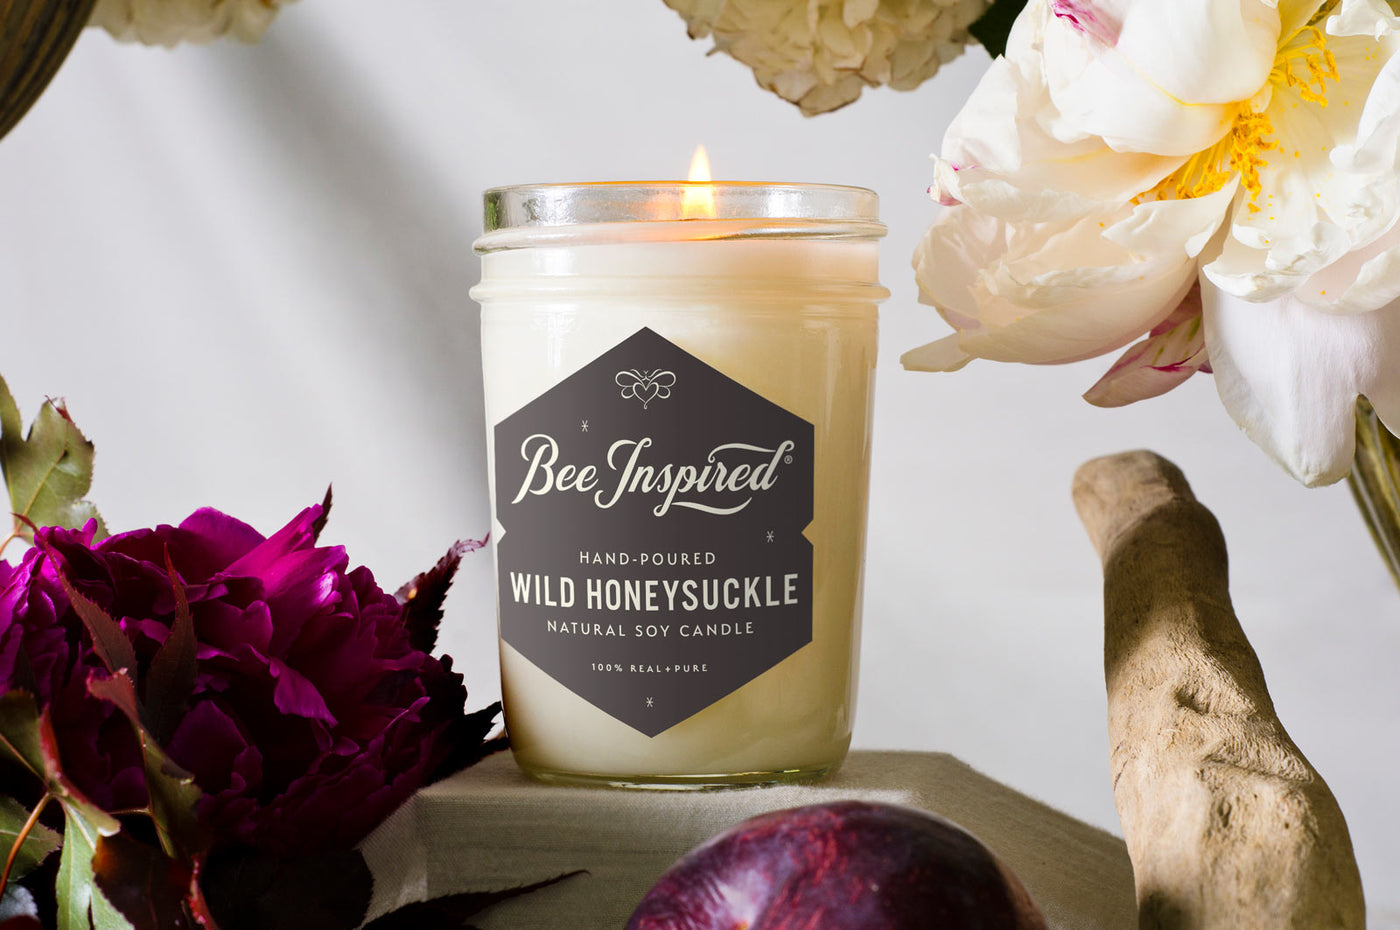 Bee Inspired Jelly Jar Soy Candle